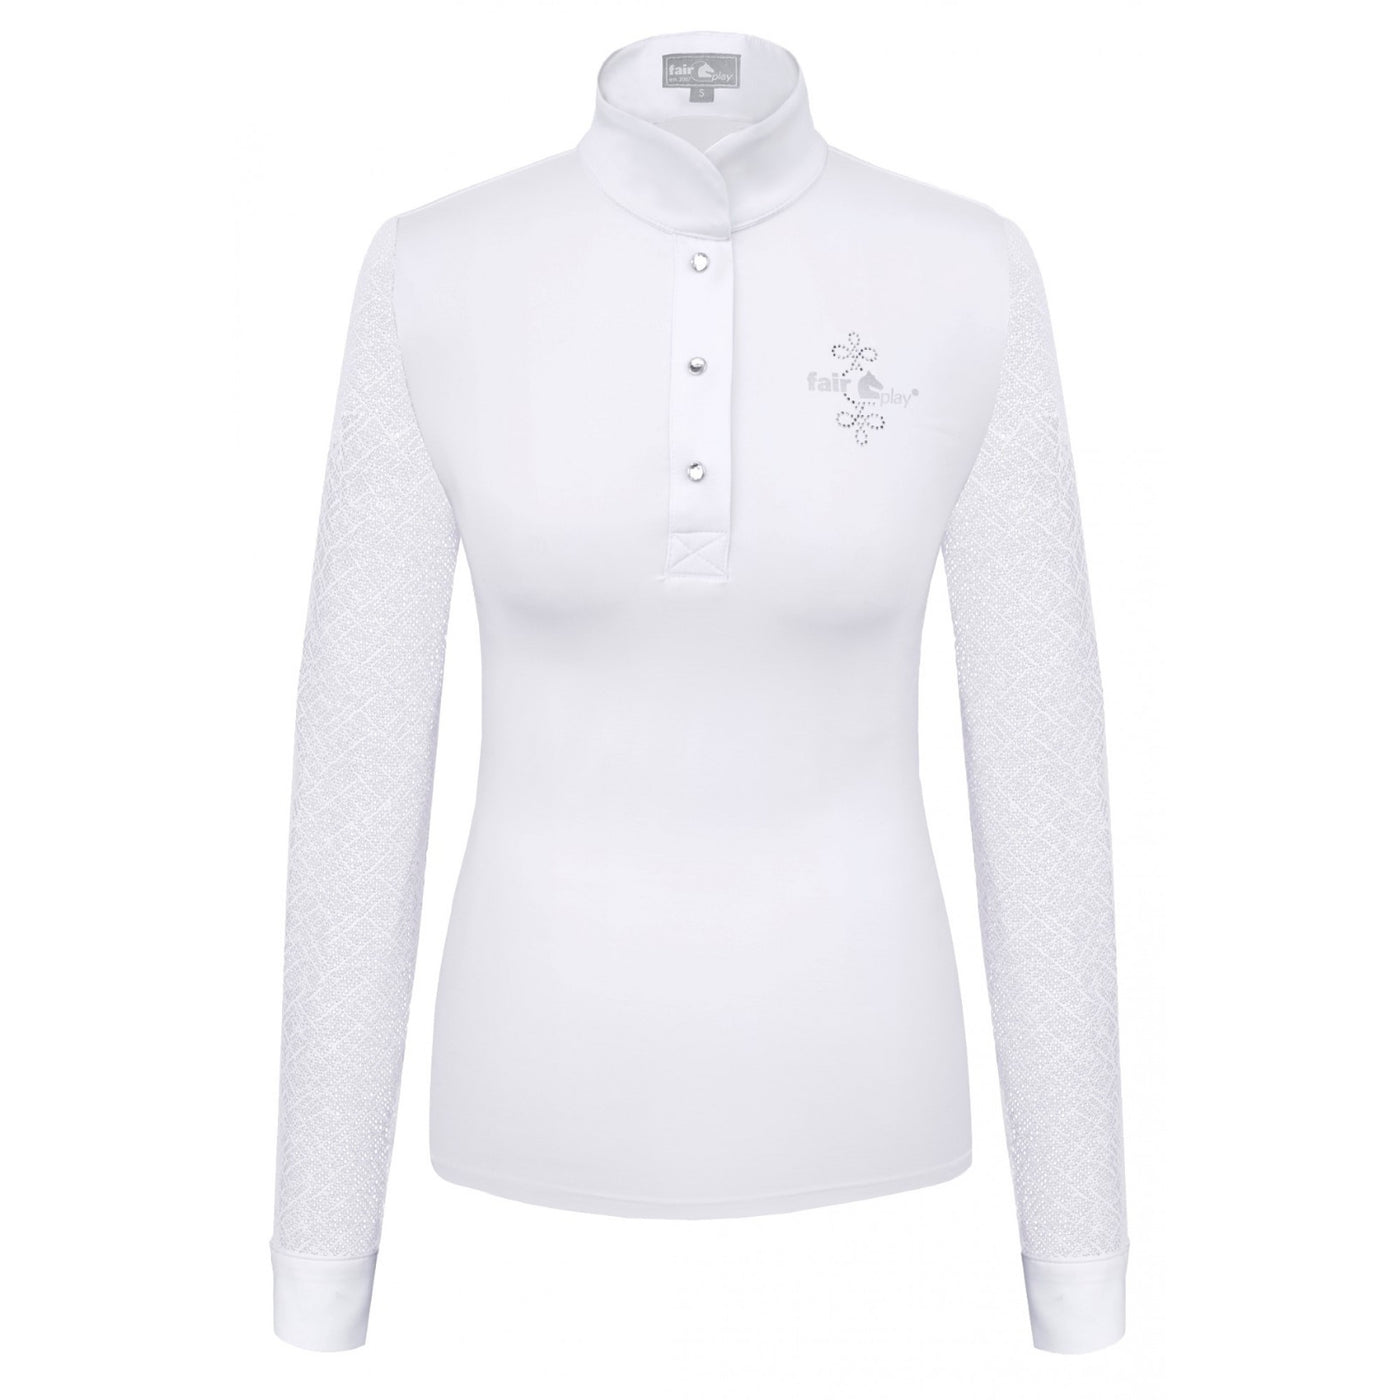 FAIR PLAY CECILE COMPETITION LONG SLEEVE SHOW SHIRT - White